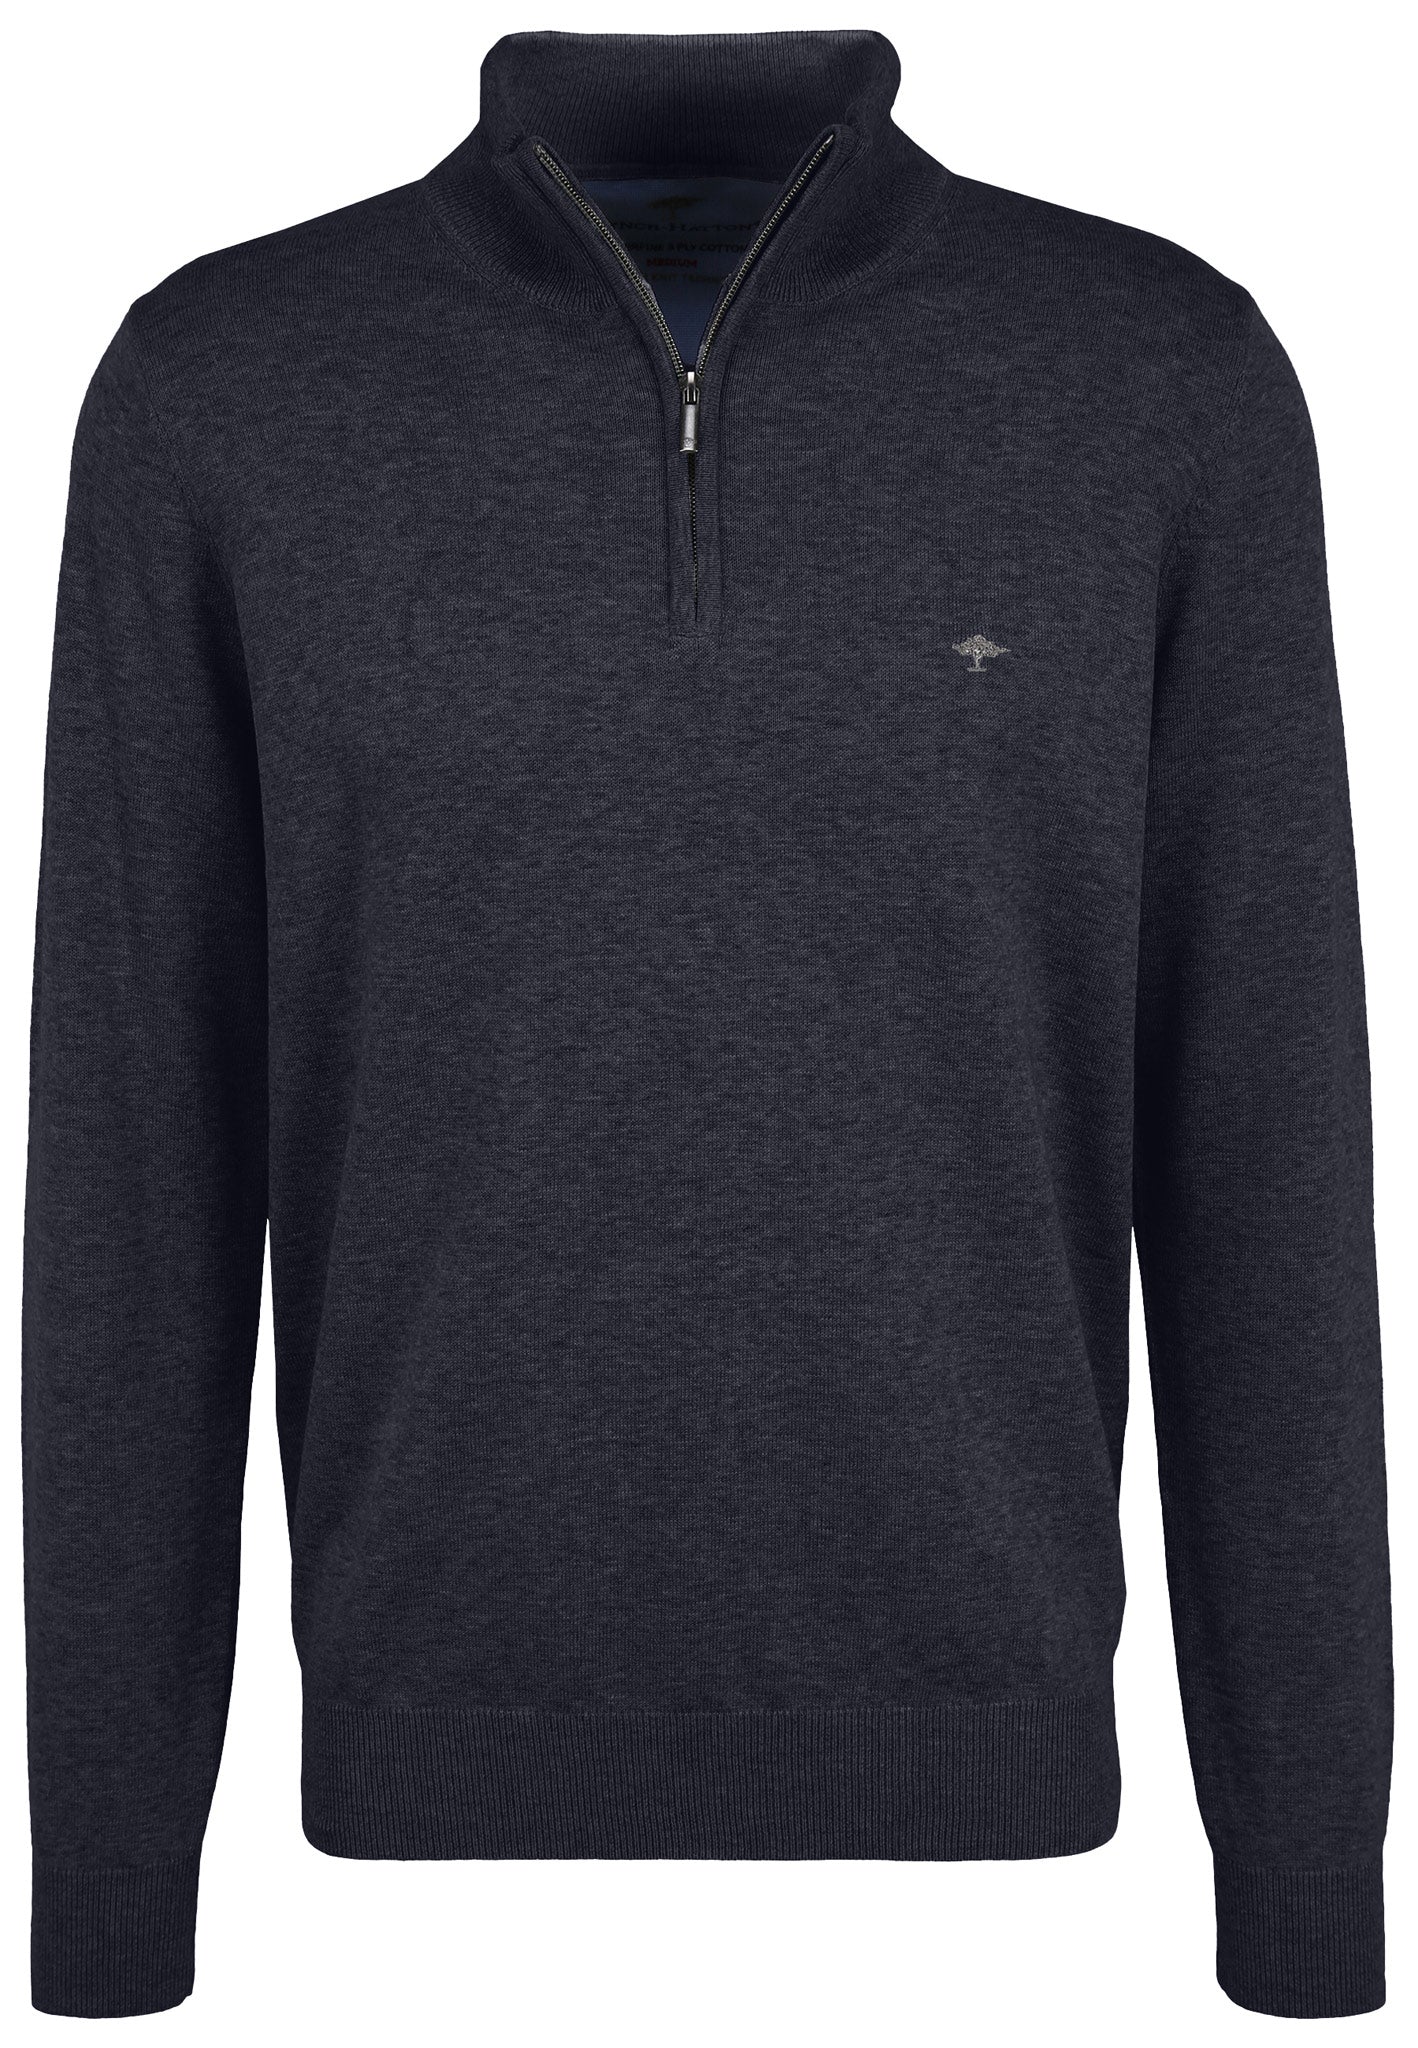 Fynch Hatton Troyer Design Casual Fit Pullover, Knitwear in regular Classic fit.   Chosen in a navy colour. ( 1221  215  690)